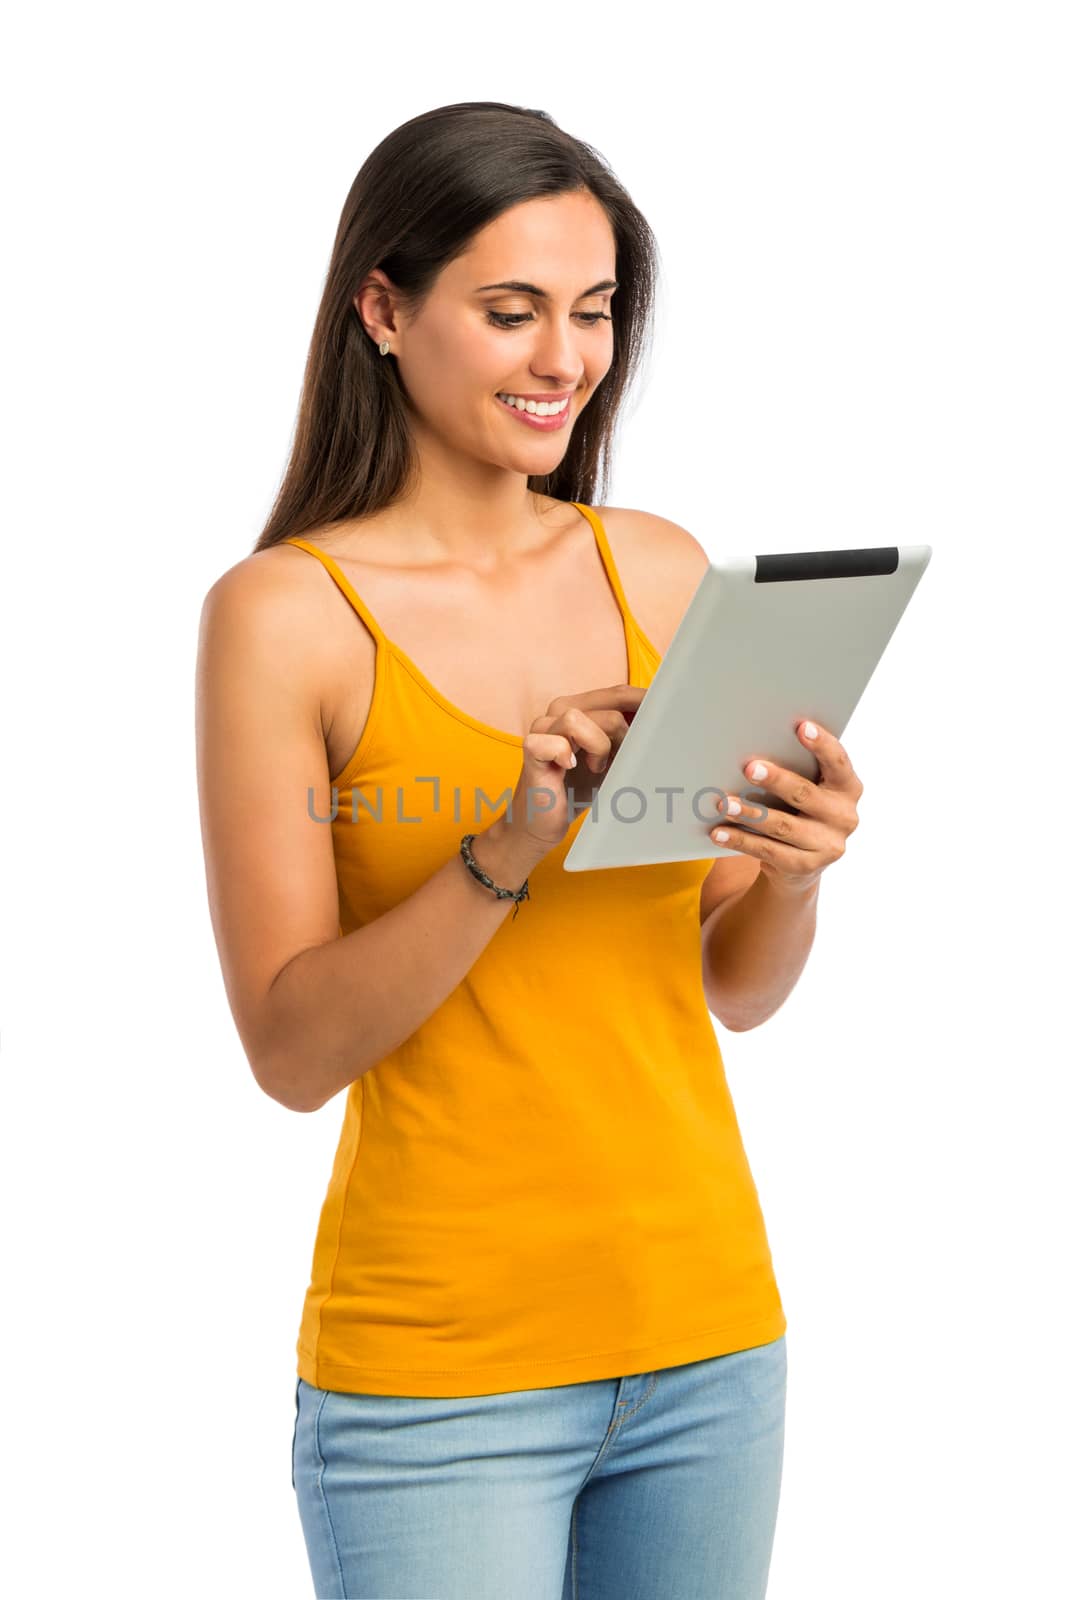 Beautiful and happy young woman working with a tablet